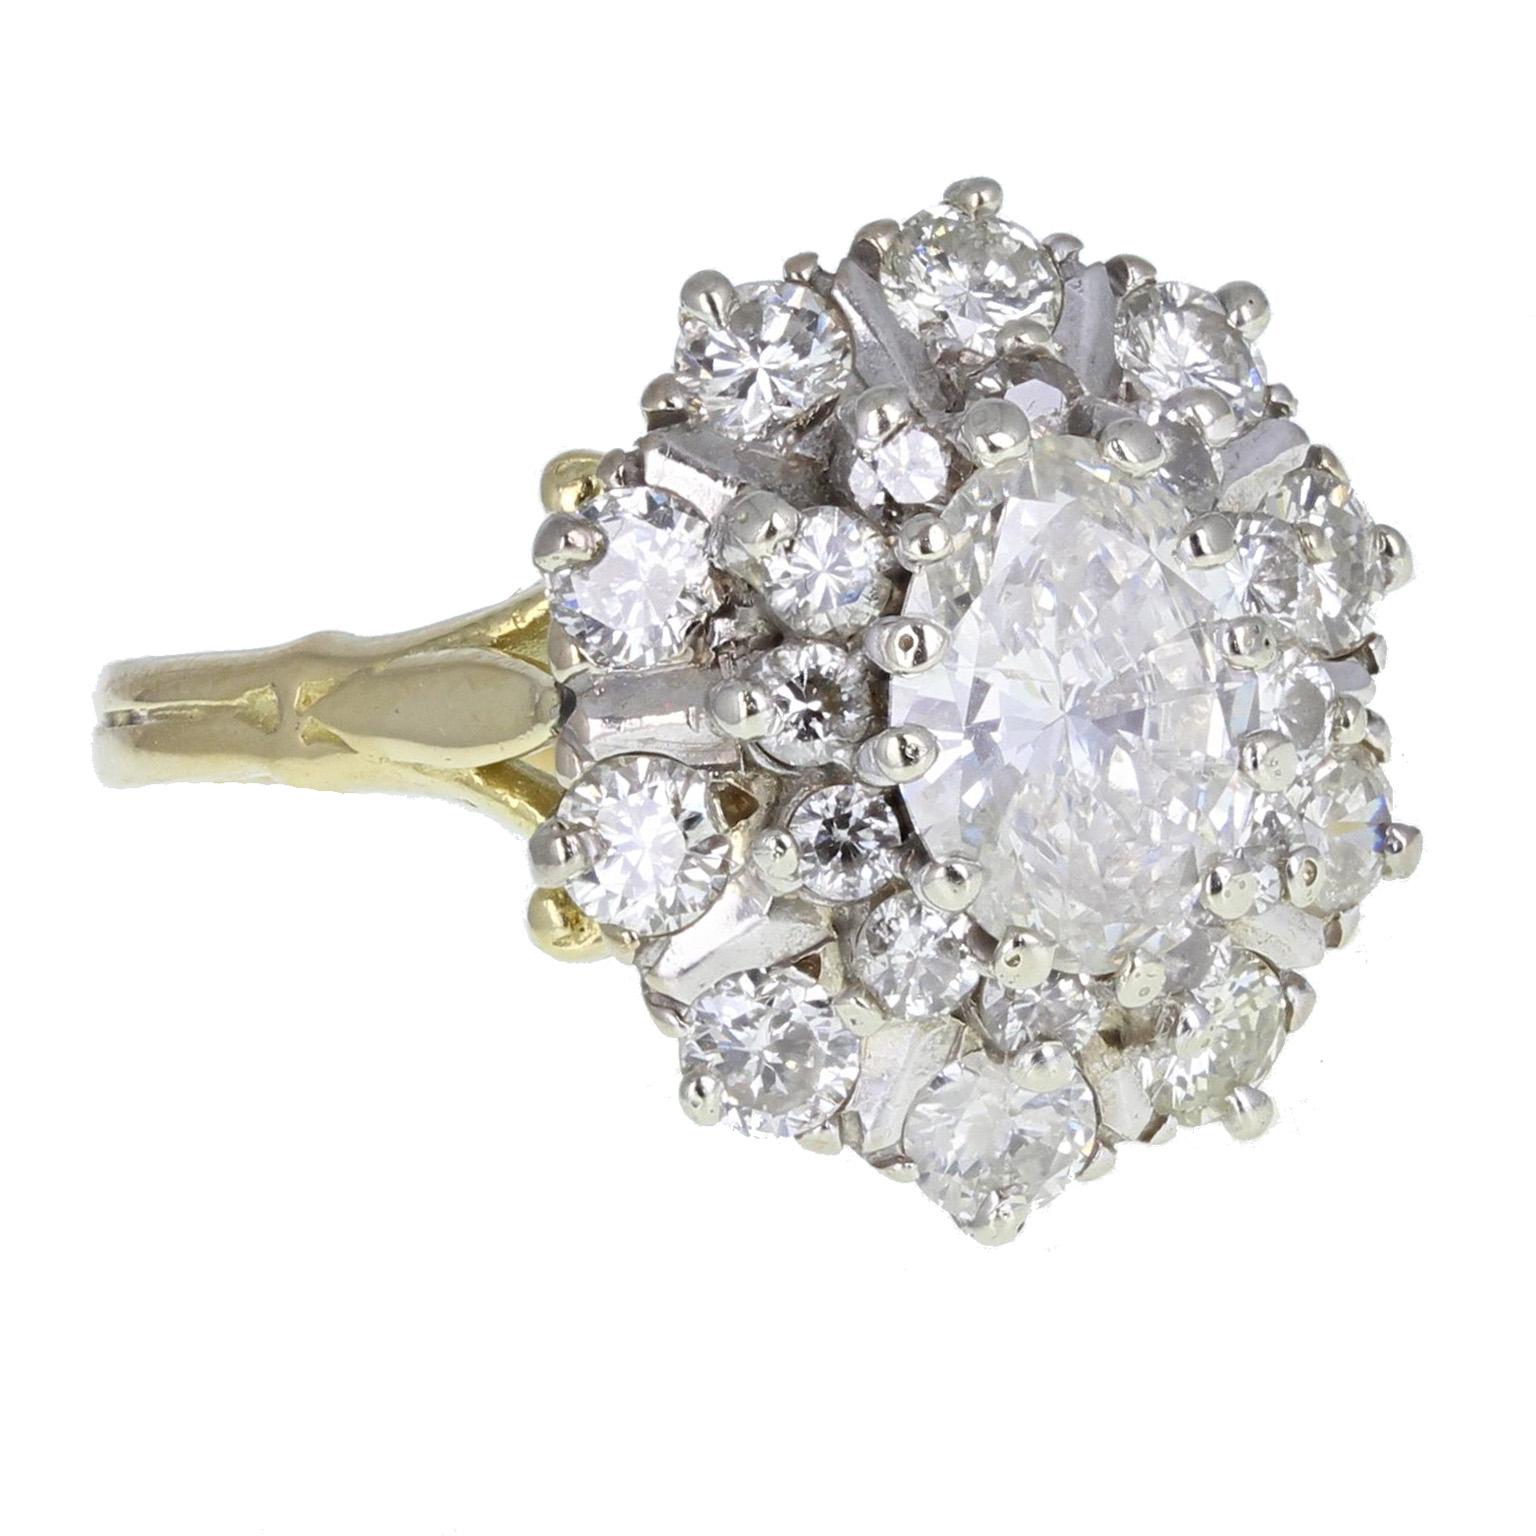 A sparkling and fine quality central oval brilliant-cut diamond mounted in 18-carat white gold claws, surrounded by a halo of 12 melee diamonds, further accented by 10 brilliant-cut diamonds, bar-set to form an oval shaped cluster ring.